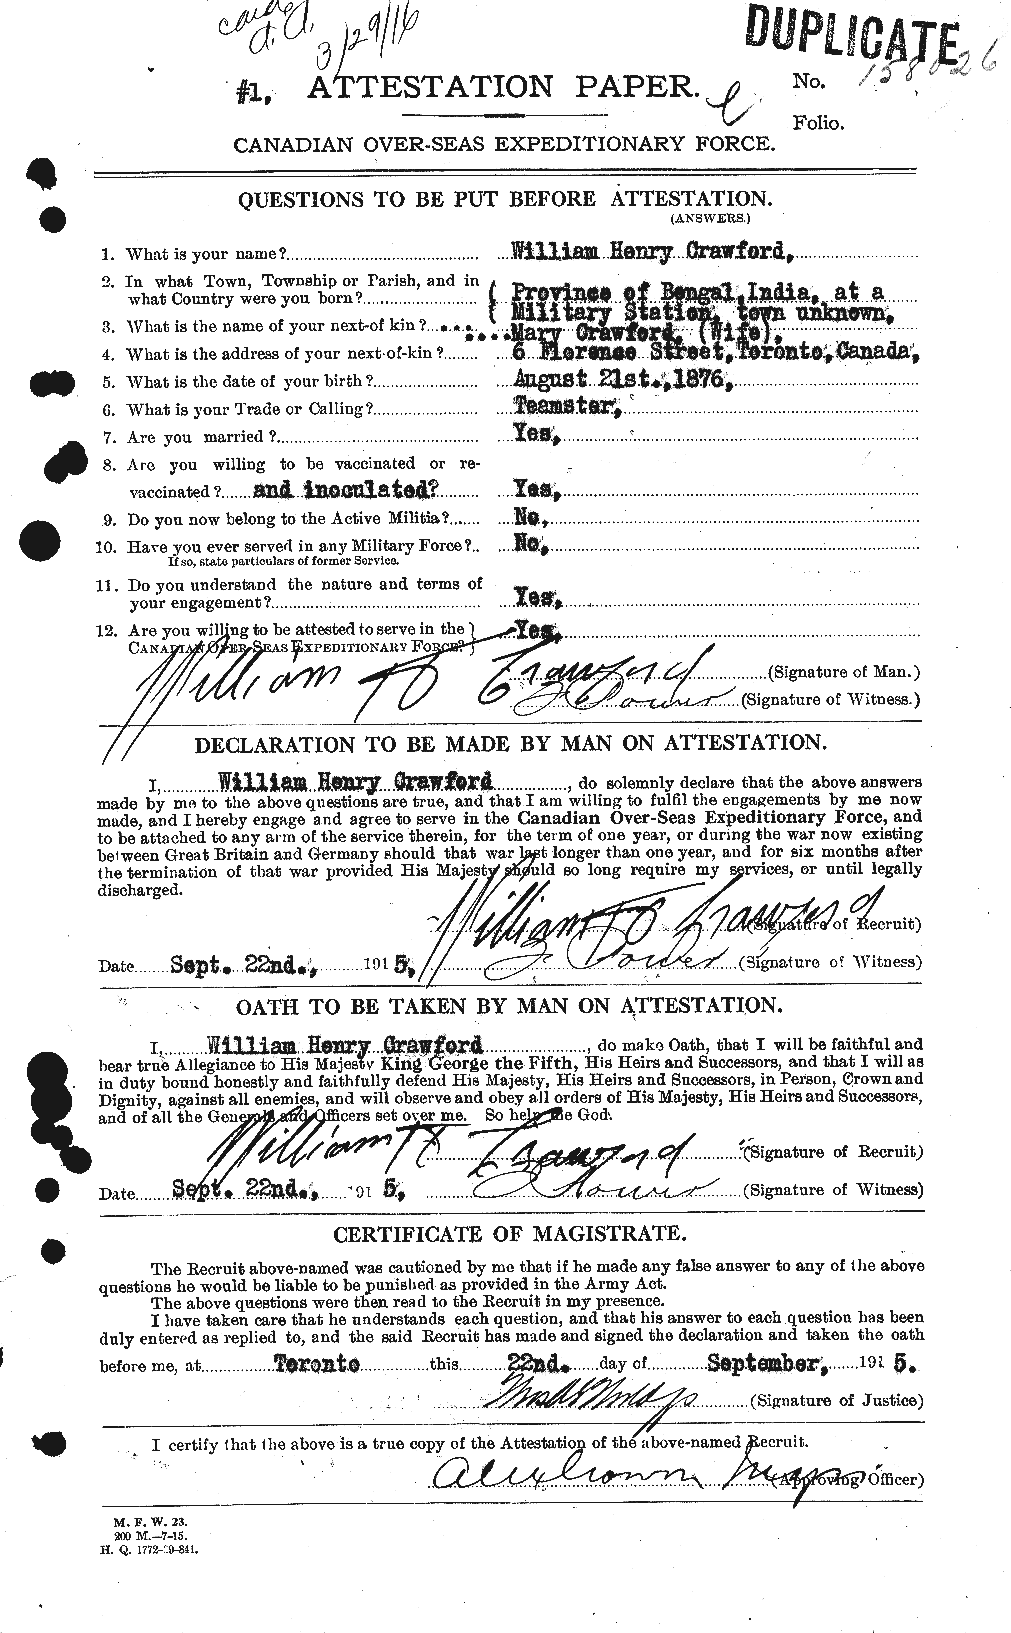 Personnel Records of the First World War - CEF 061138a